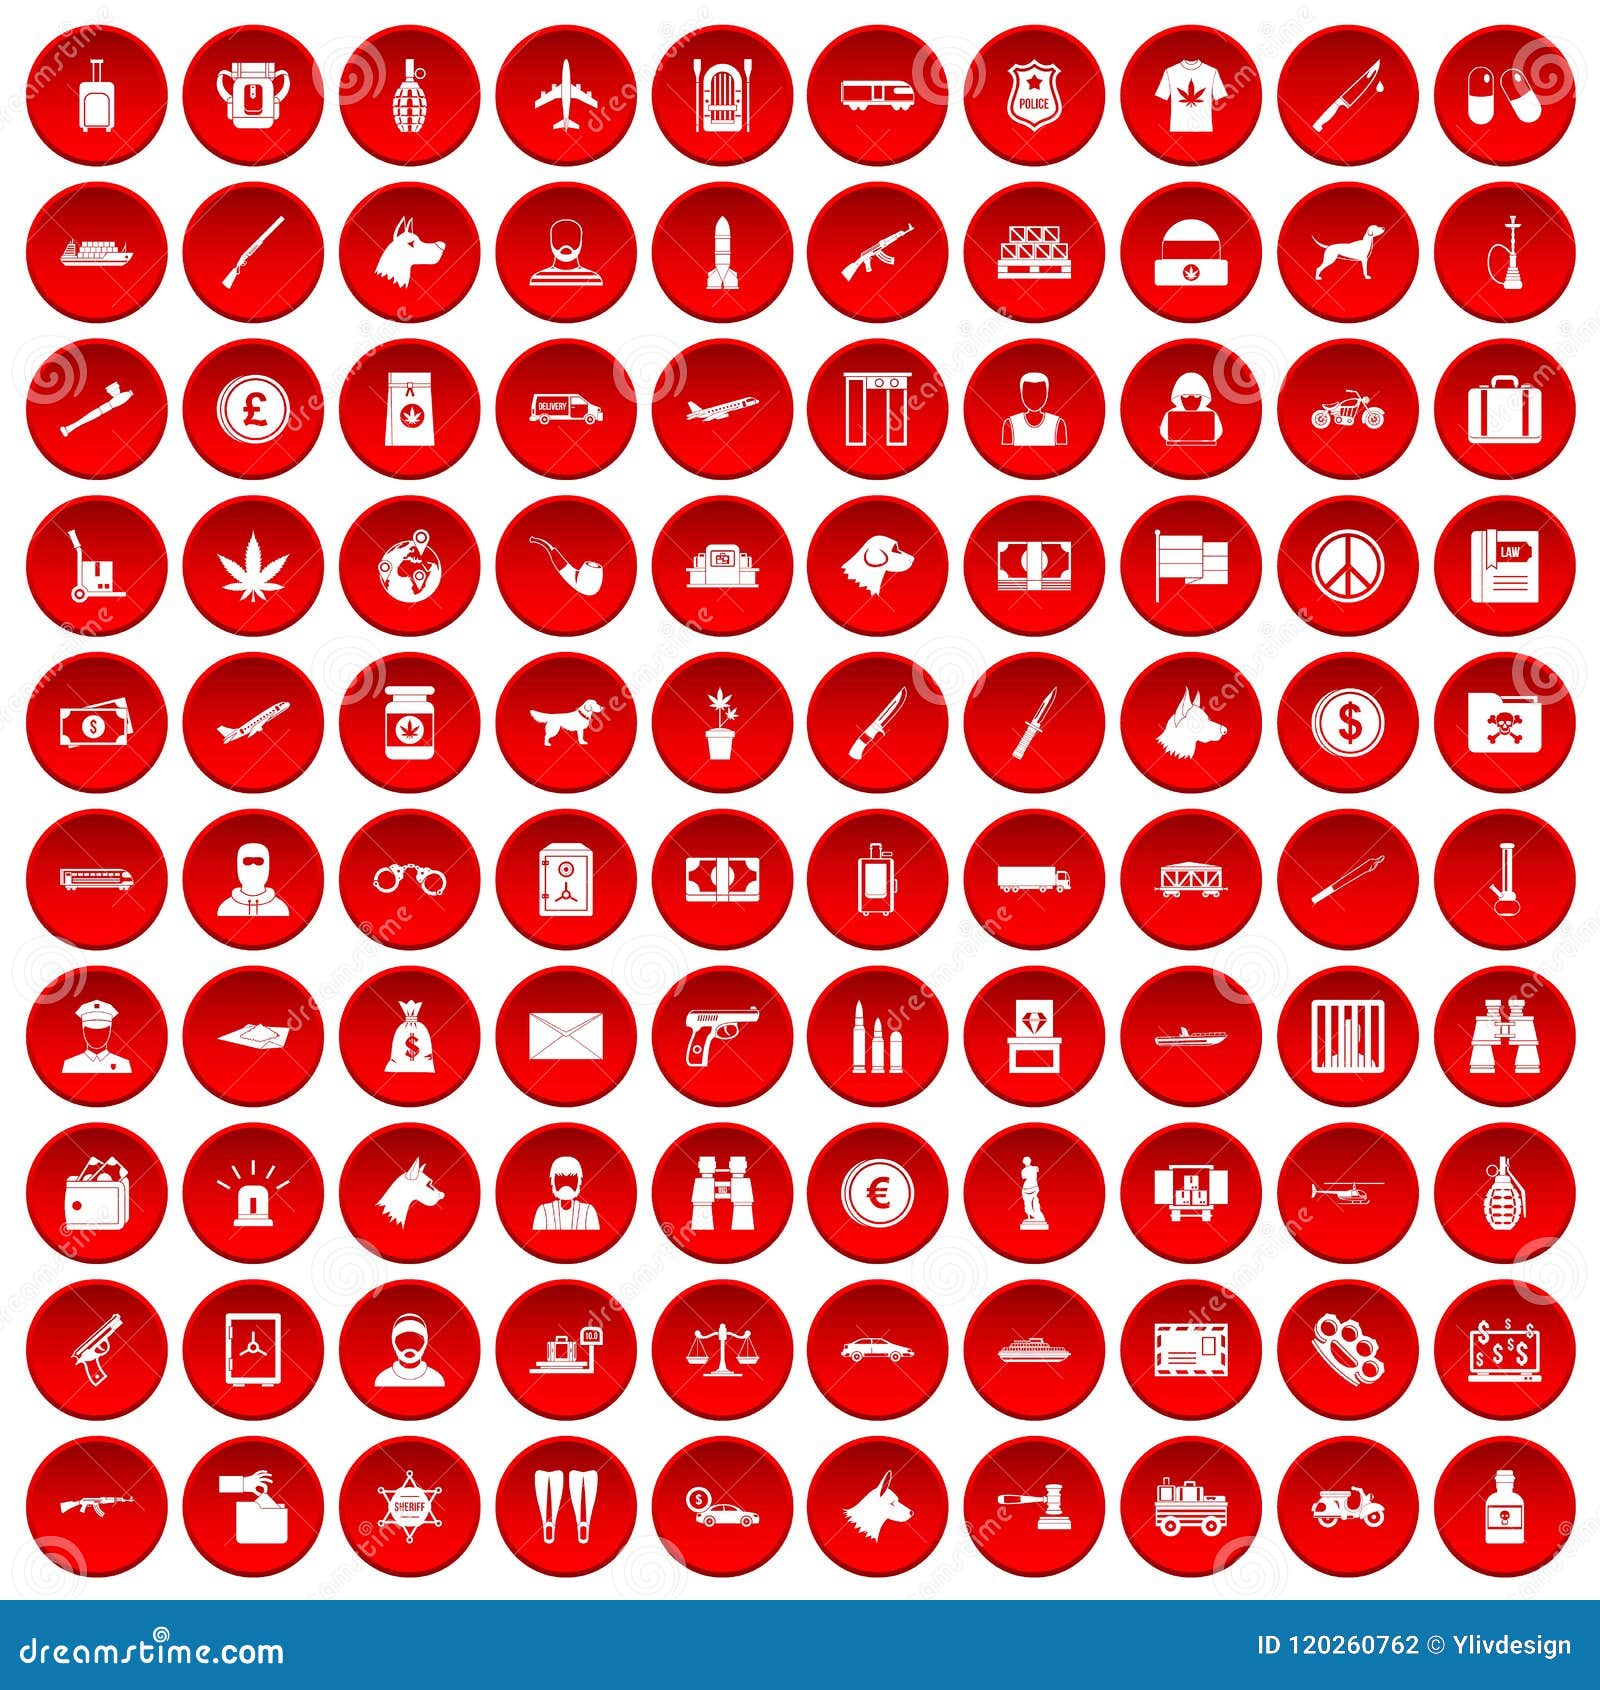 100 smuggling icons set red